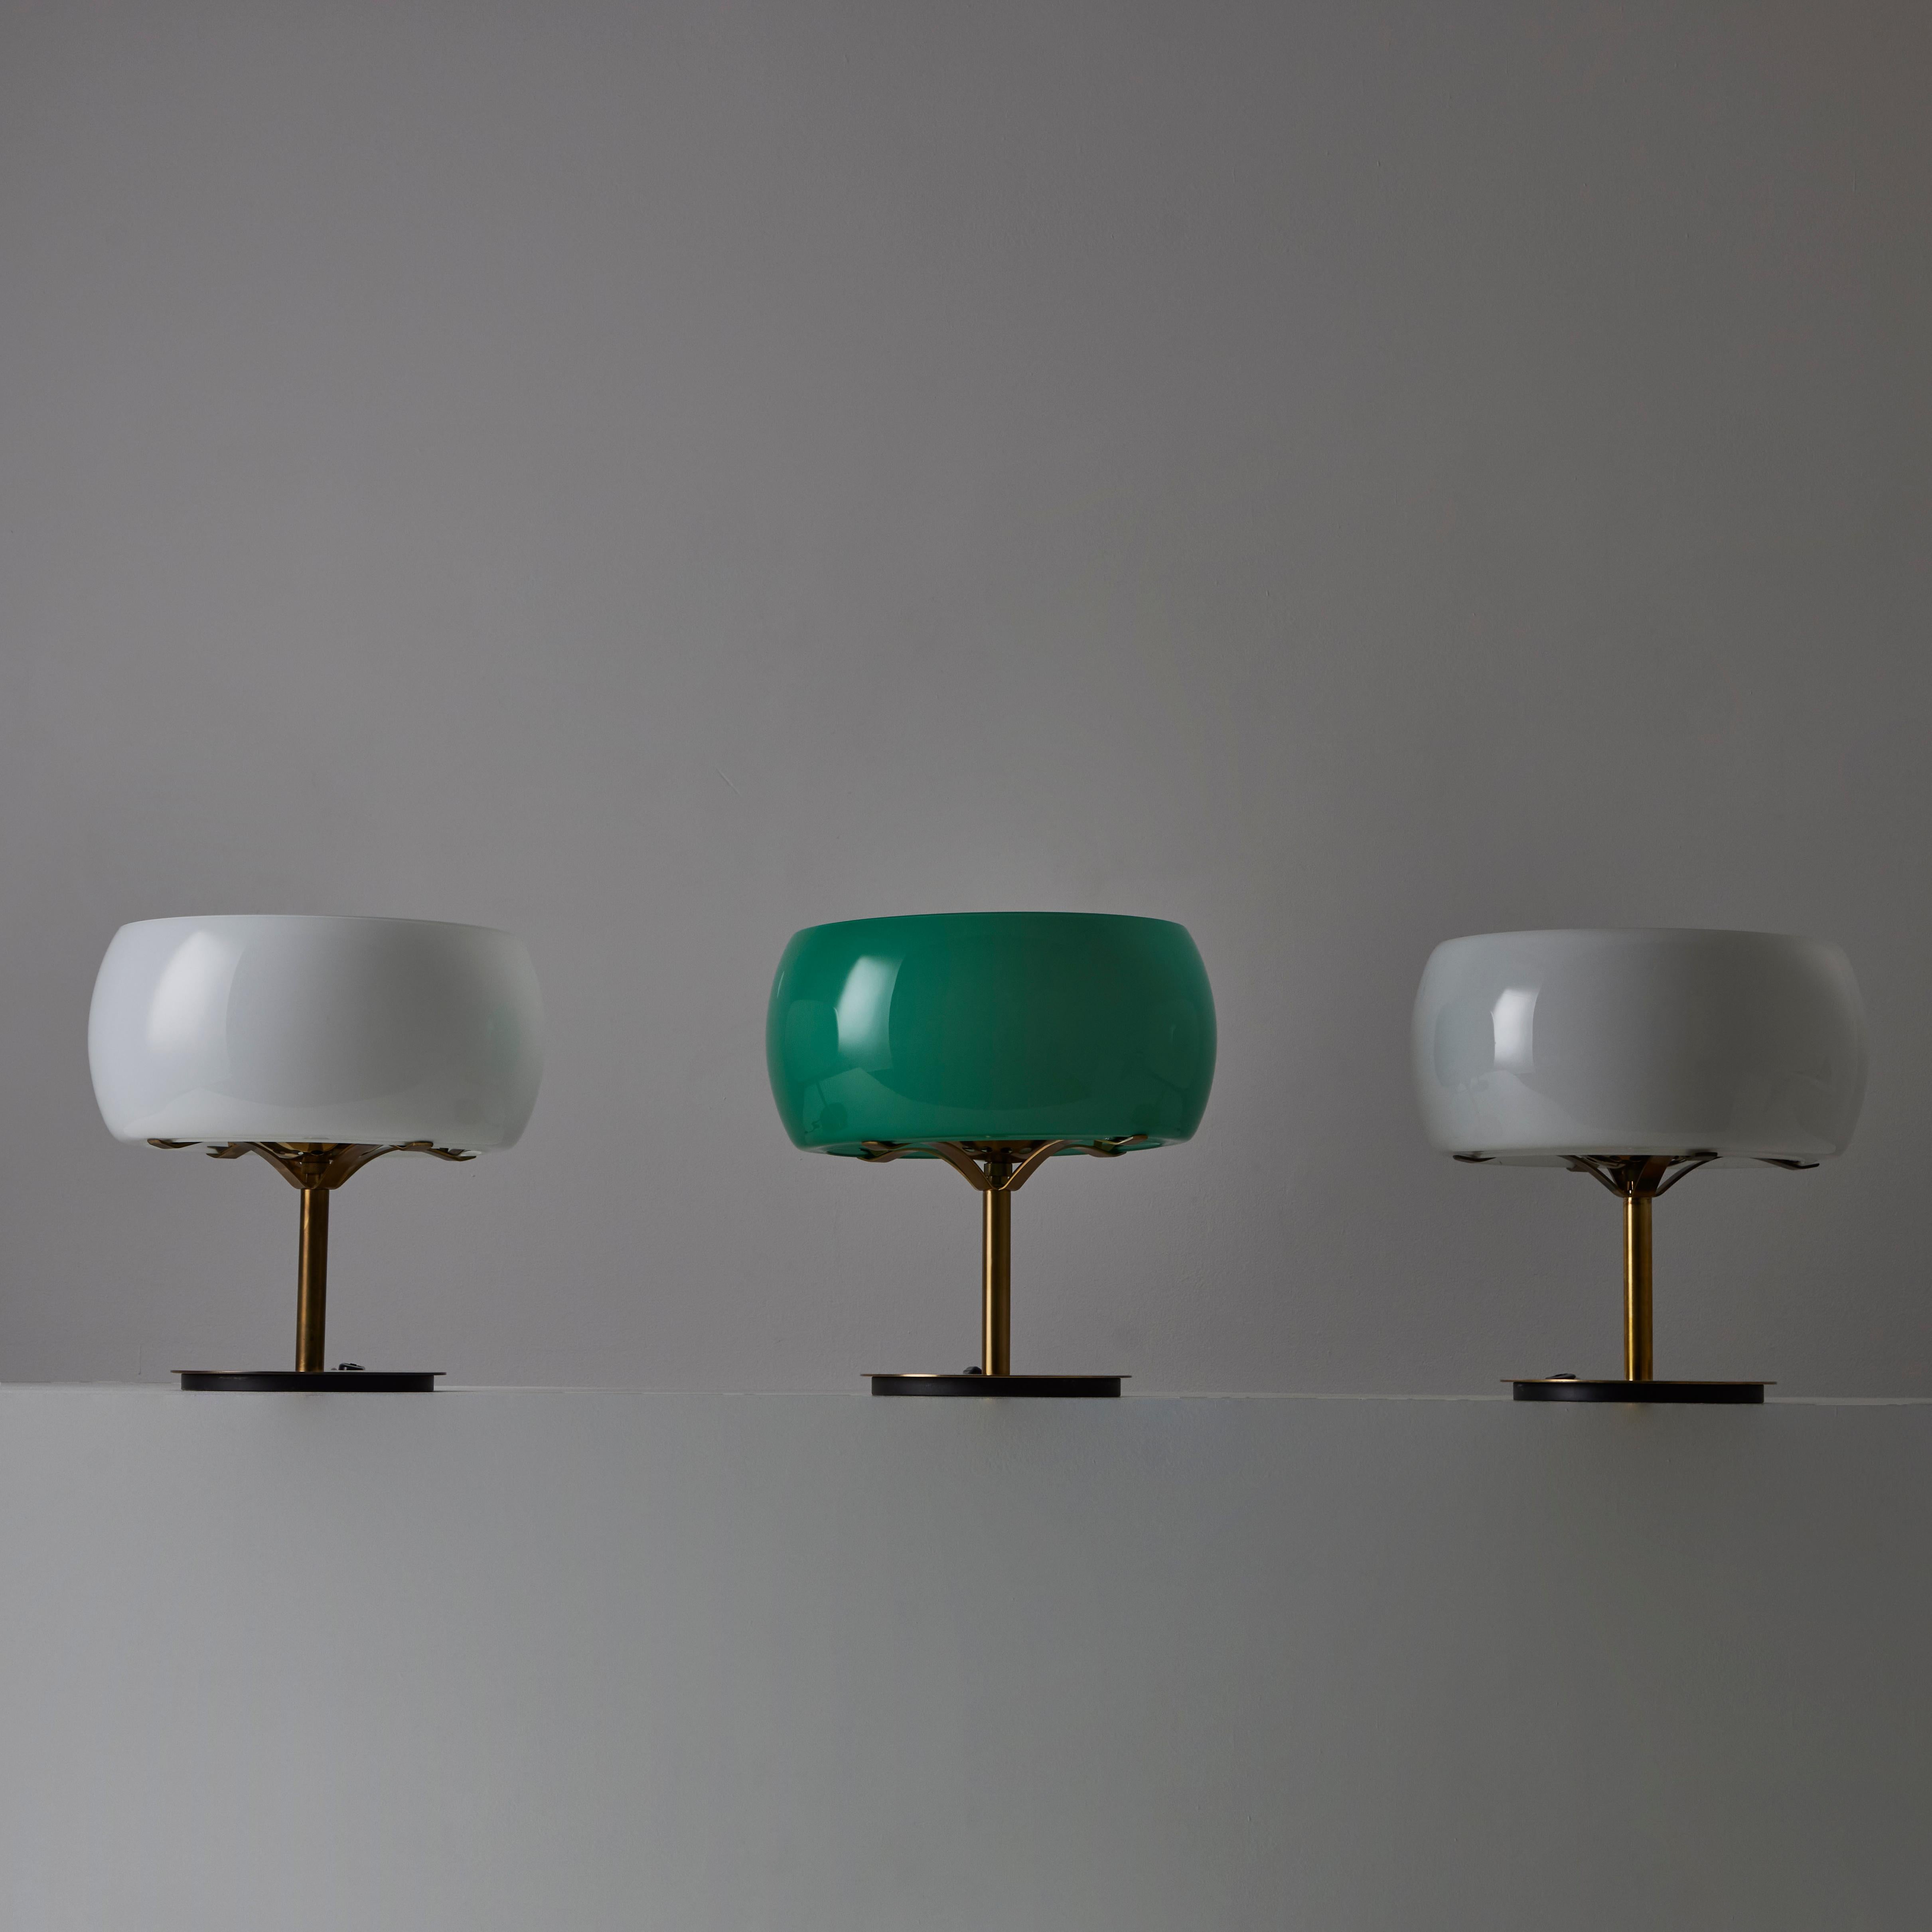 Brass Rare 'Erse' Table Lamp by Vico Magistretti for Artemide For Sale